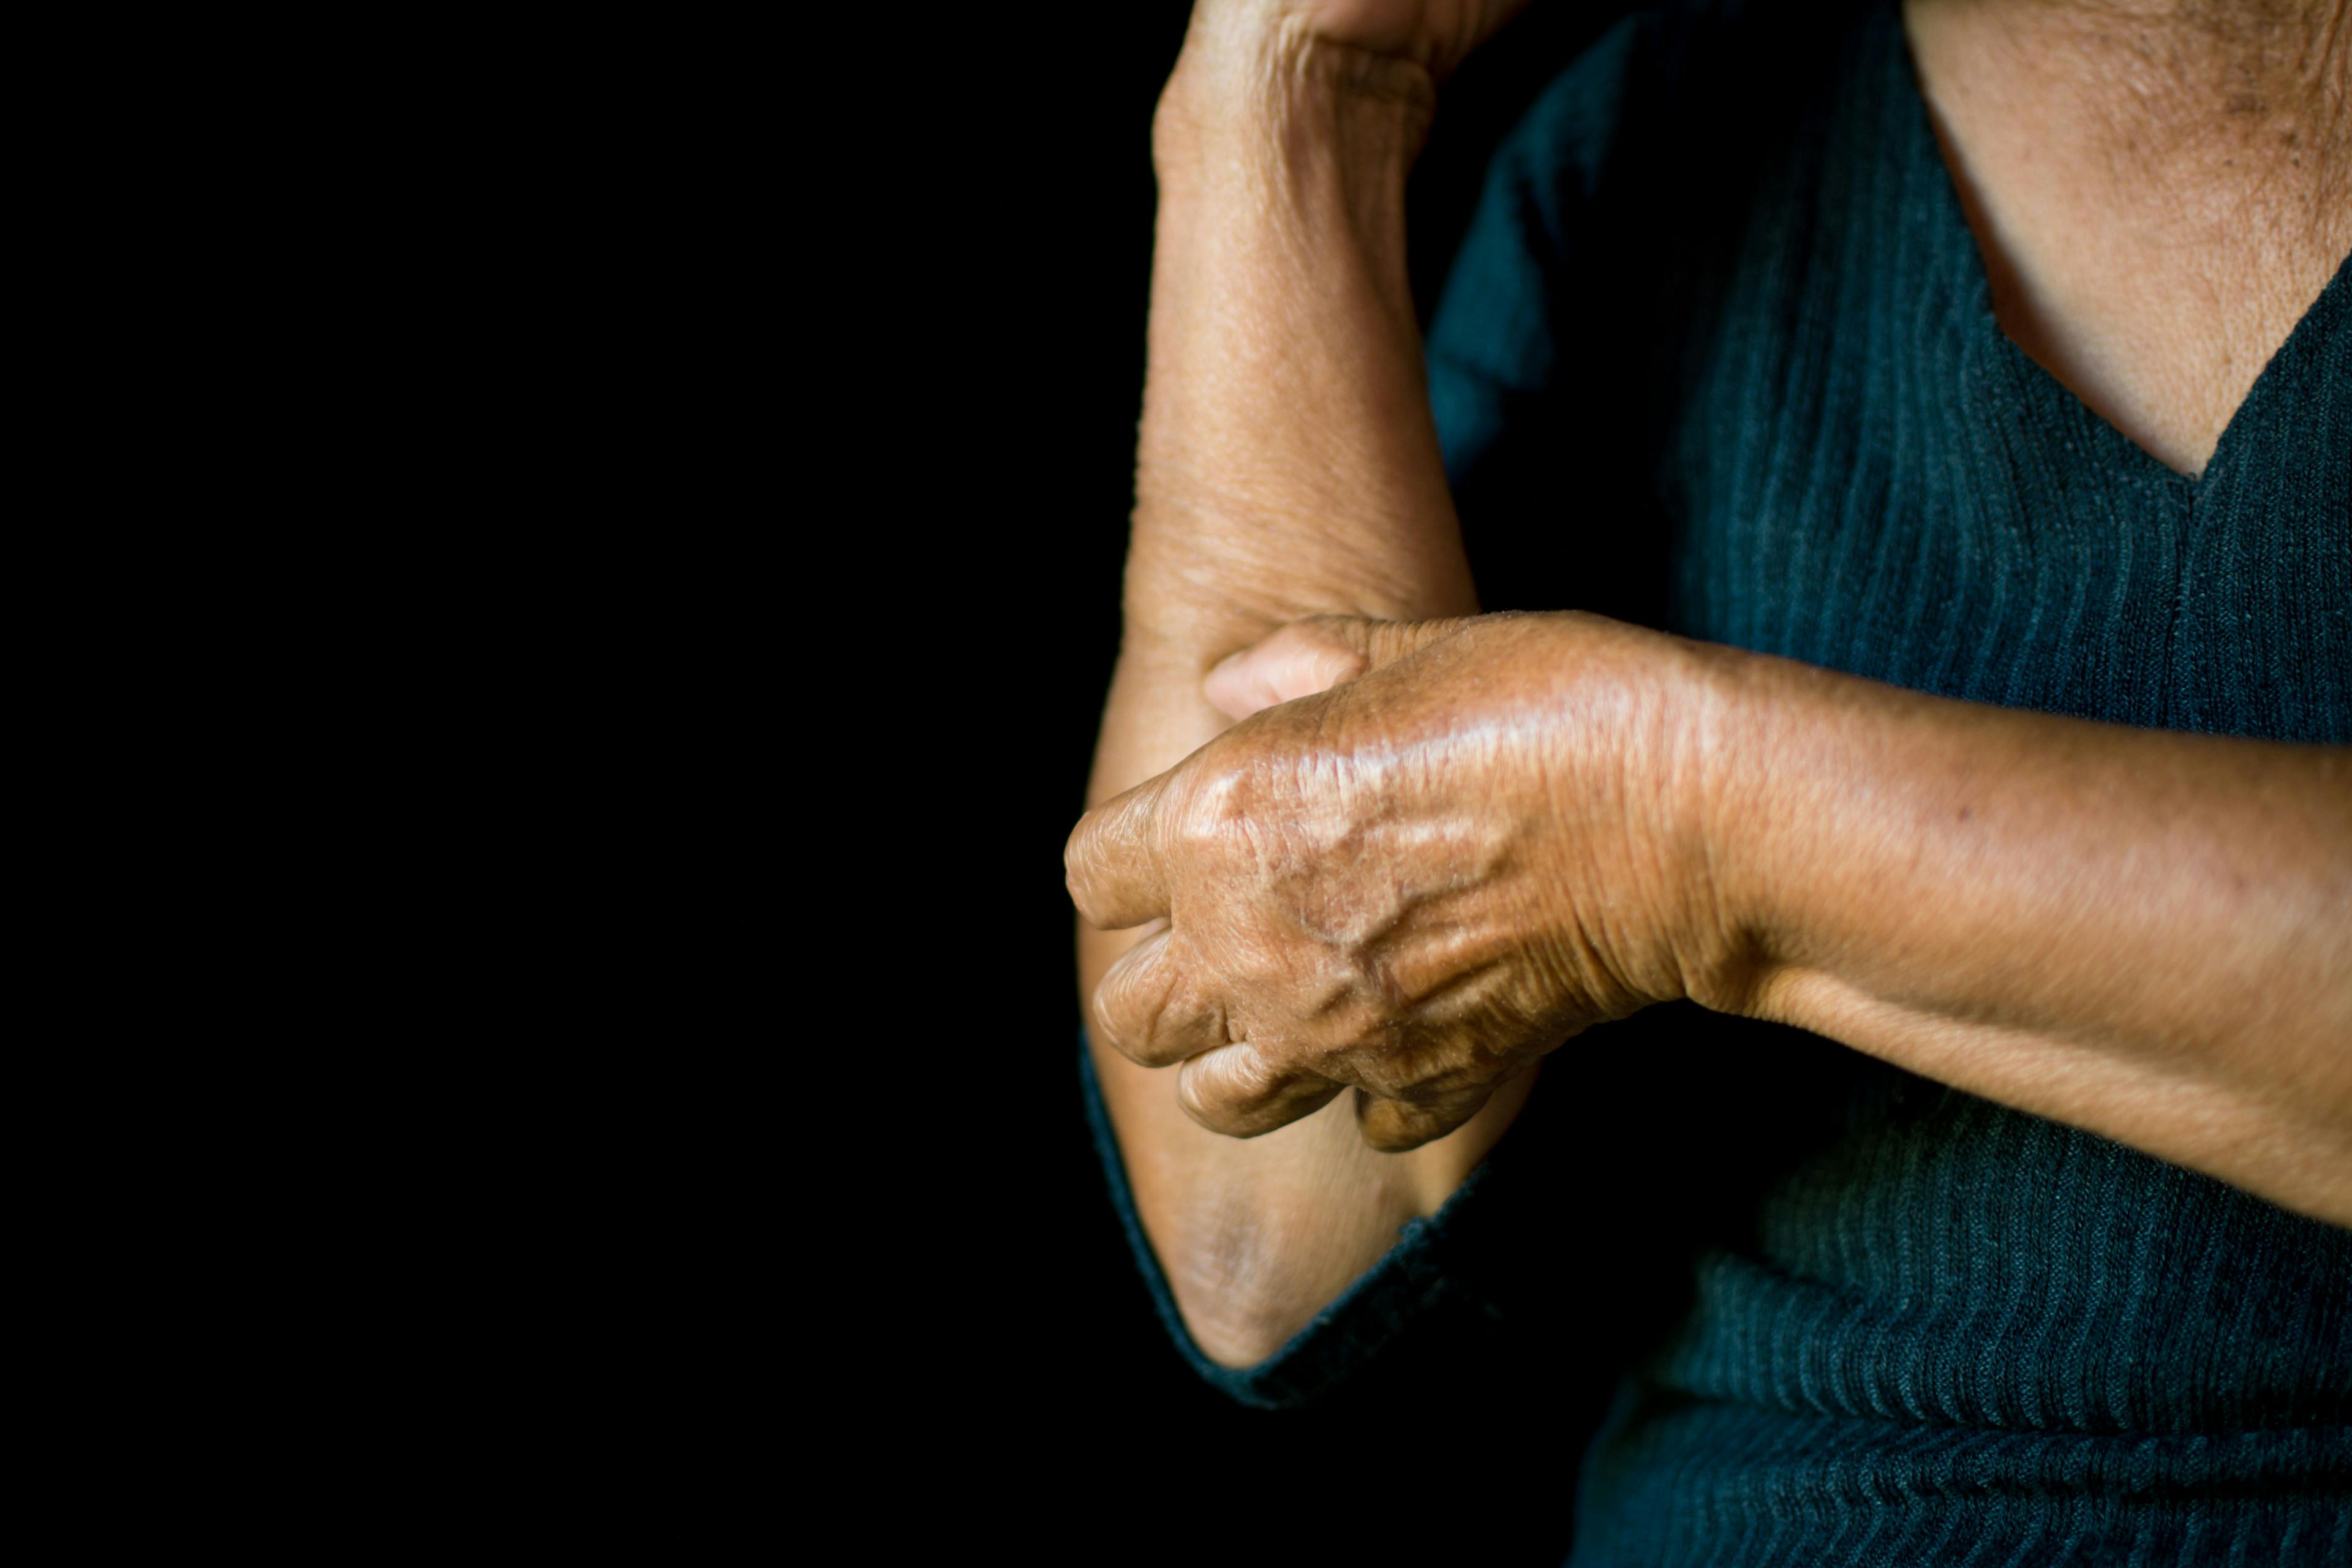 No Differences in Severity or Treatment Among Racially Diverse Eczema Patients